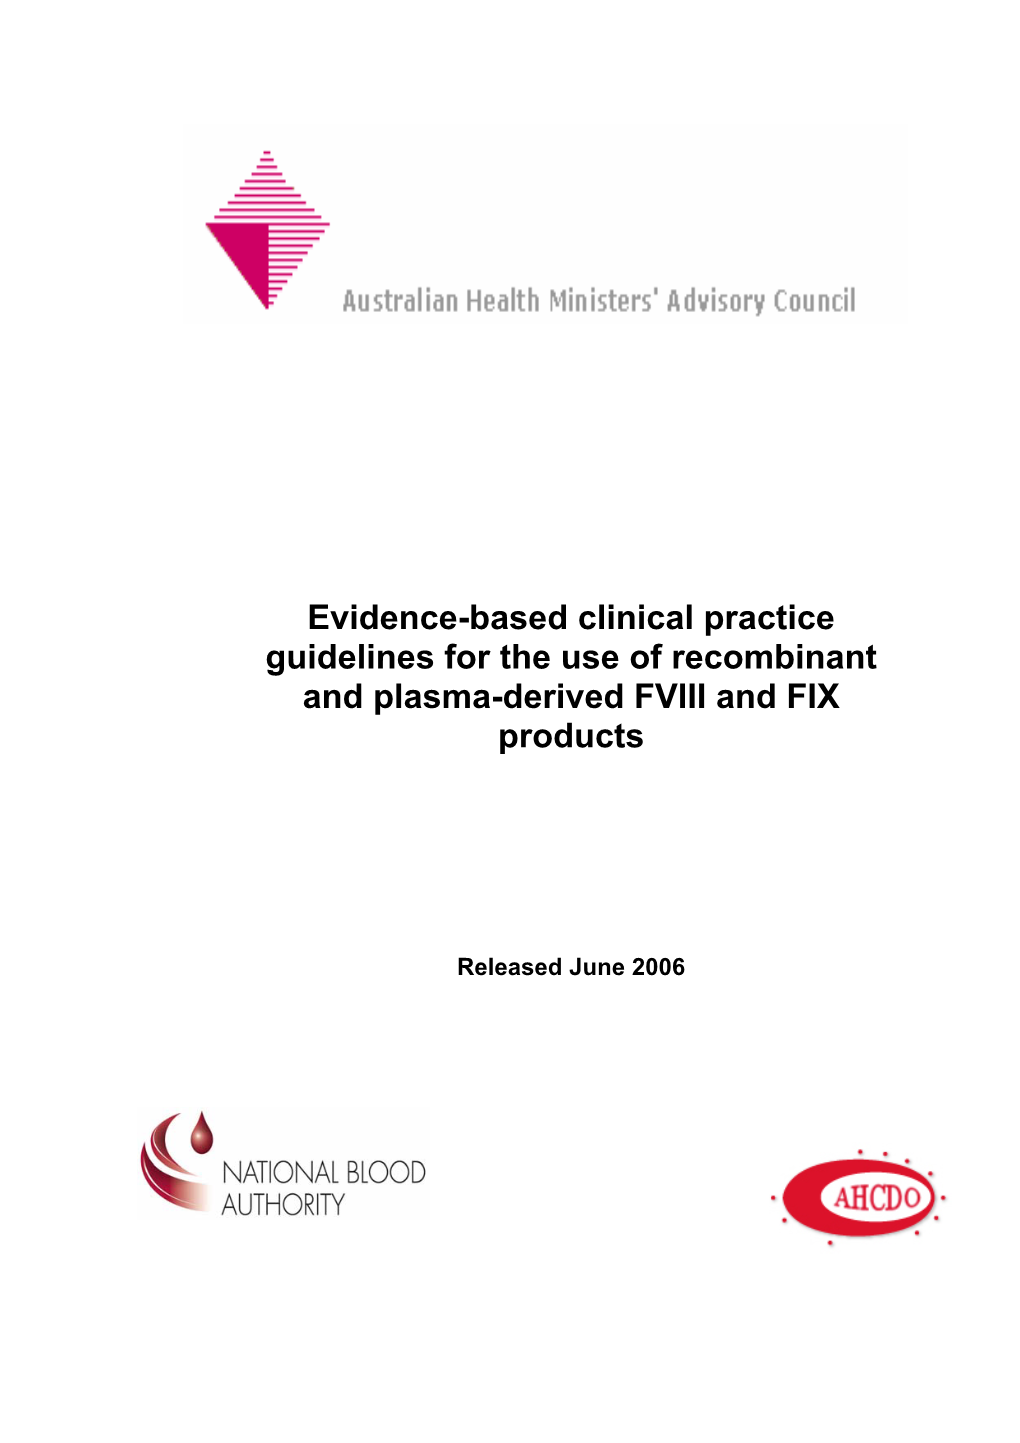 Evidence-Based Clinical Practice Guidelines for the Use of Recombinant and Plasma-Derived FVIII and FIX Products